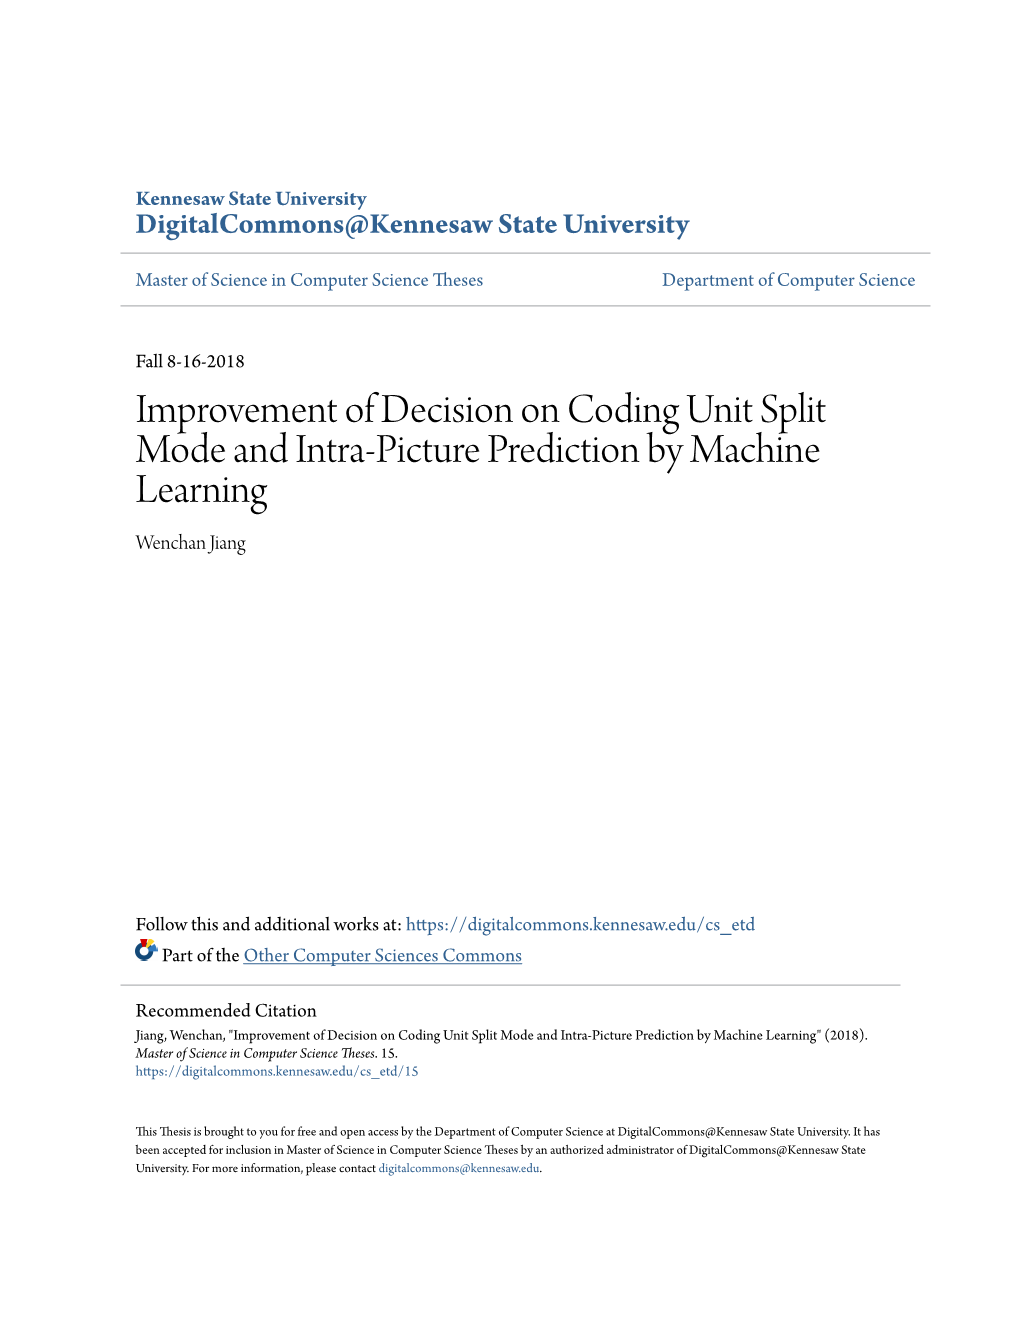 Improvement of Decision on Coding Unit Split Mode and Intra-Picture Prediction by Machine Learning Wenchan Jiang